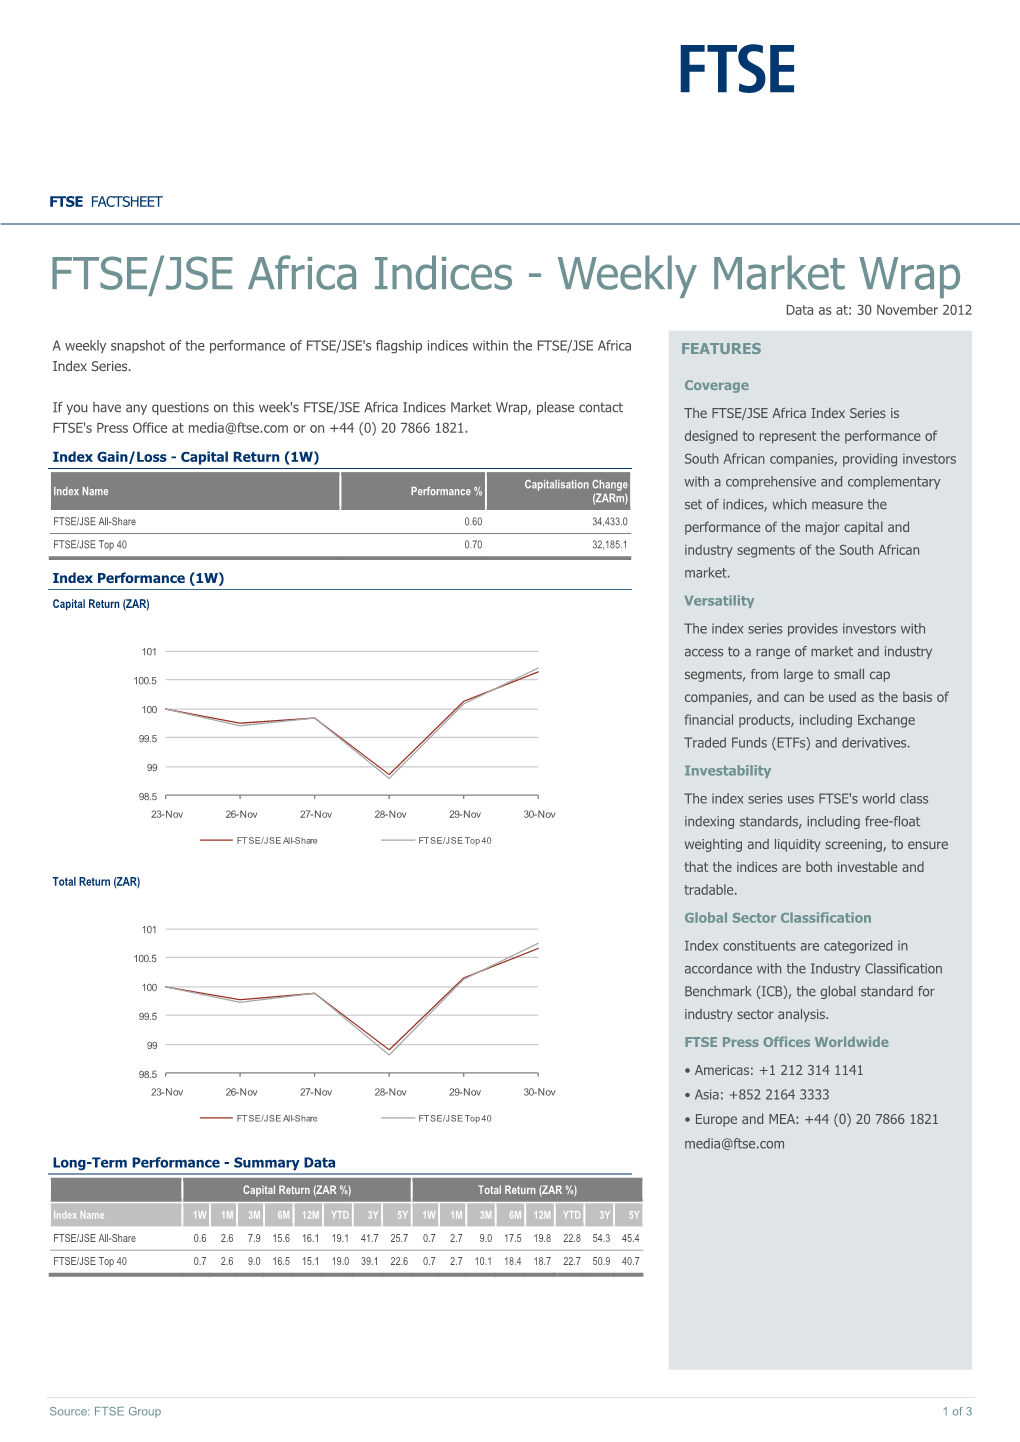 FTSE/JSE Africa Indices